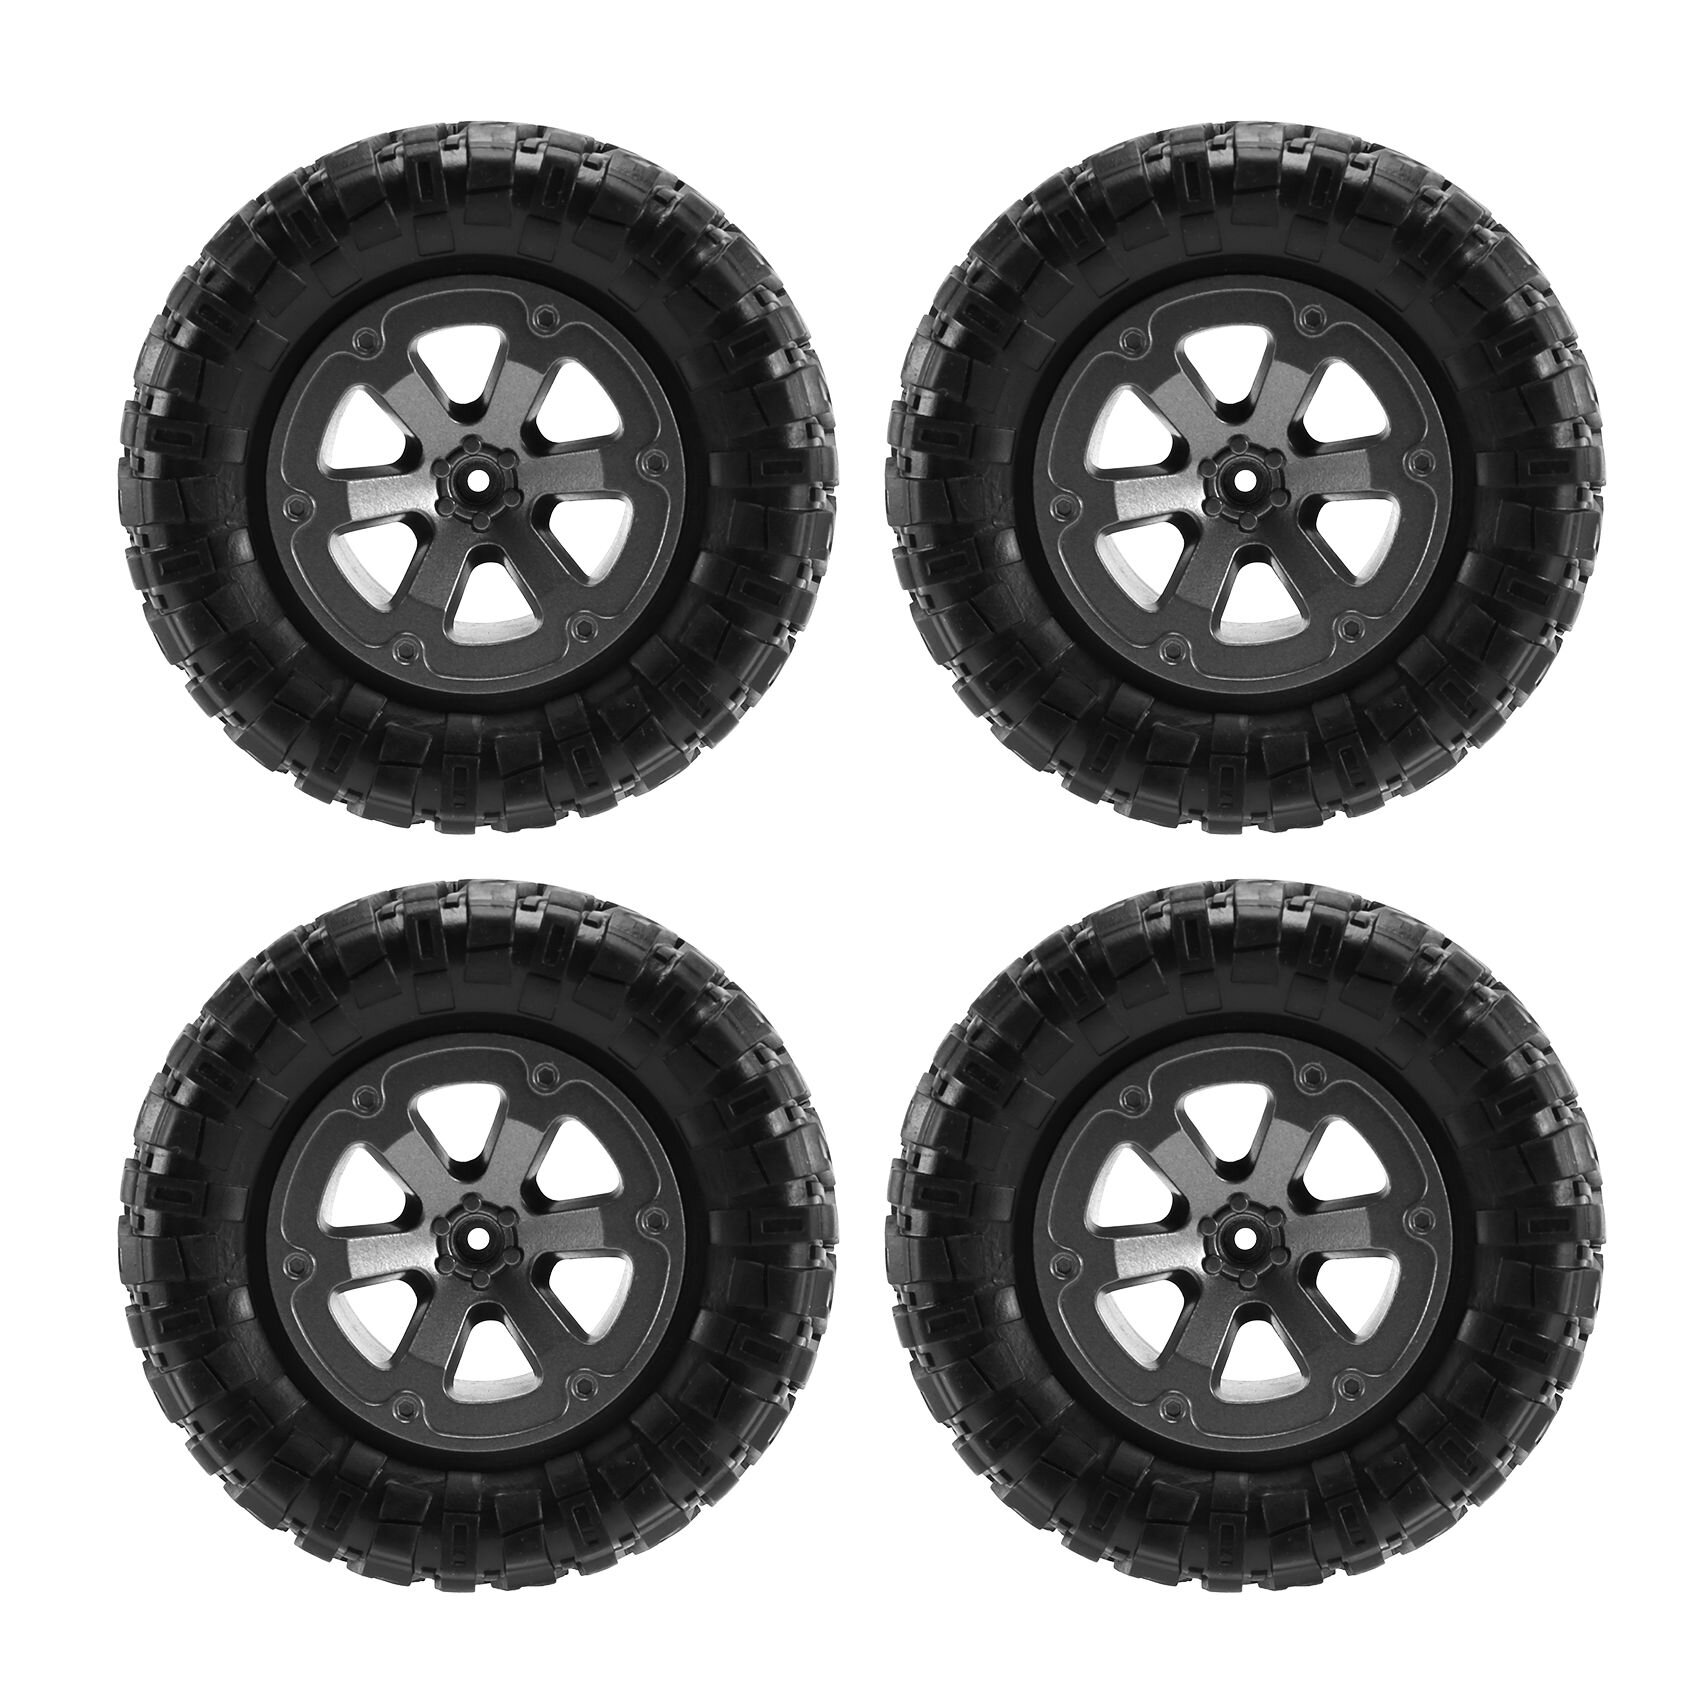 4Pcs Upgrade Track Wheels Spare Parts for 1/16 WPL B14 C24 Truck RC Car Upgrade Track Wheels Spare Parts RC Car Parts